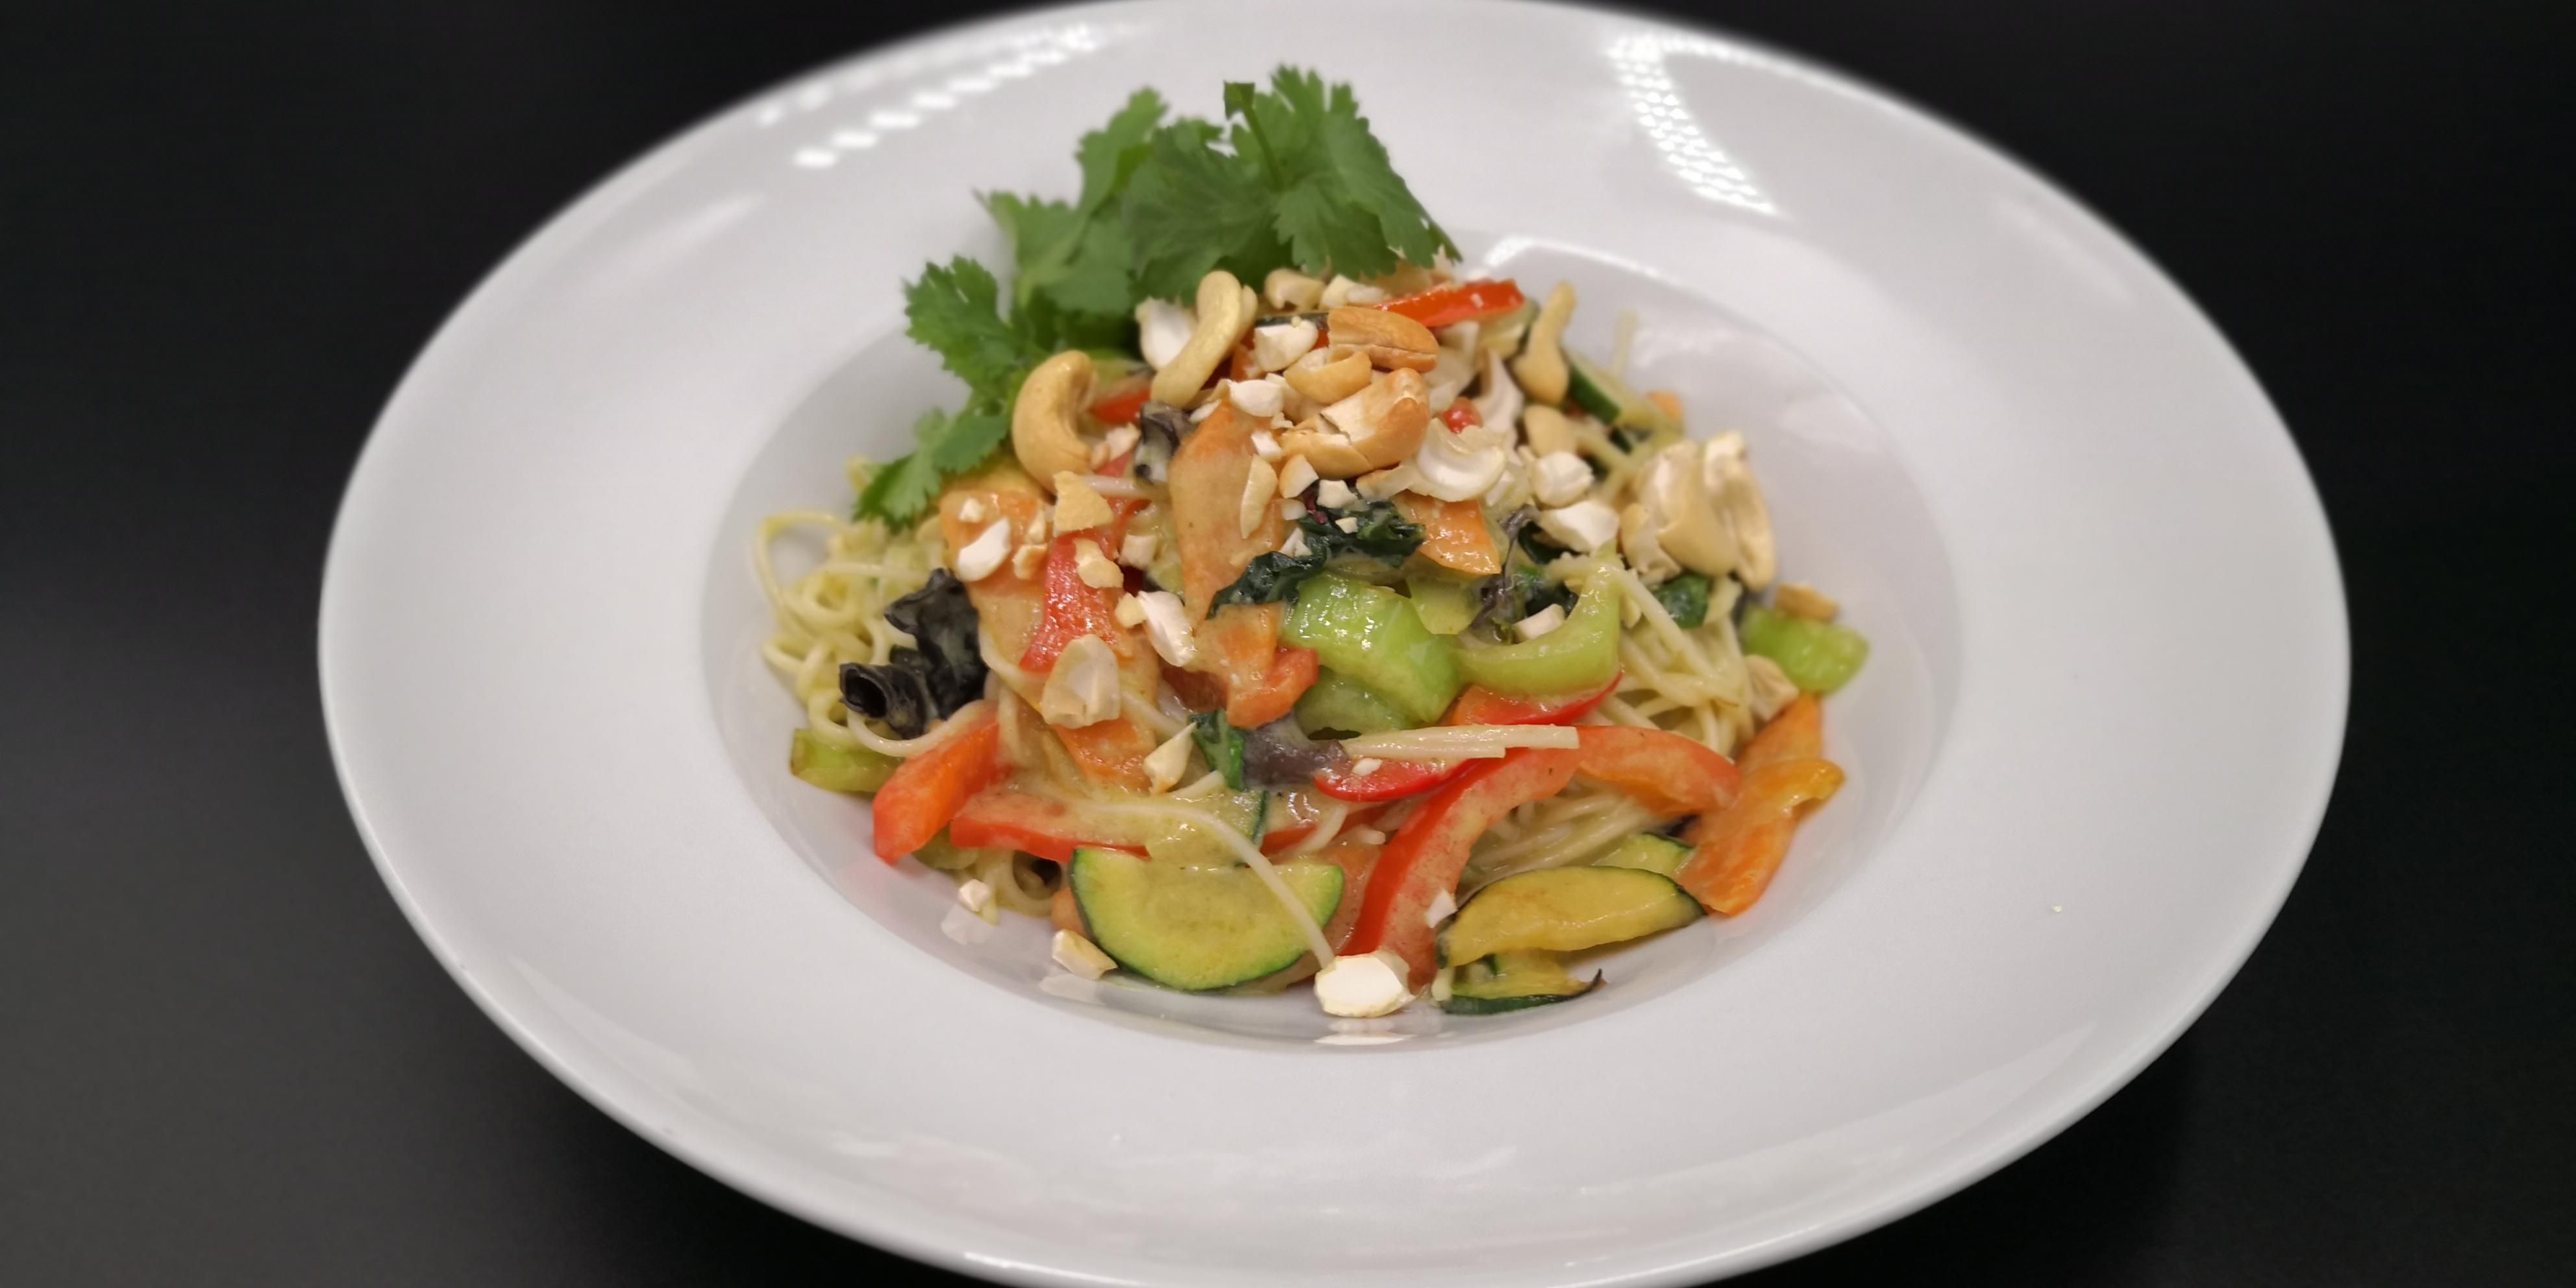 Green Curry with asia noodles and vegetables